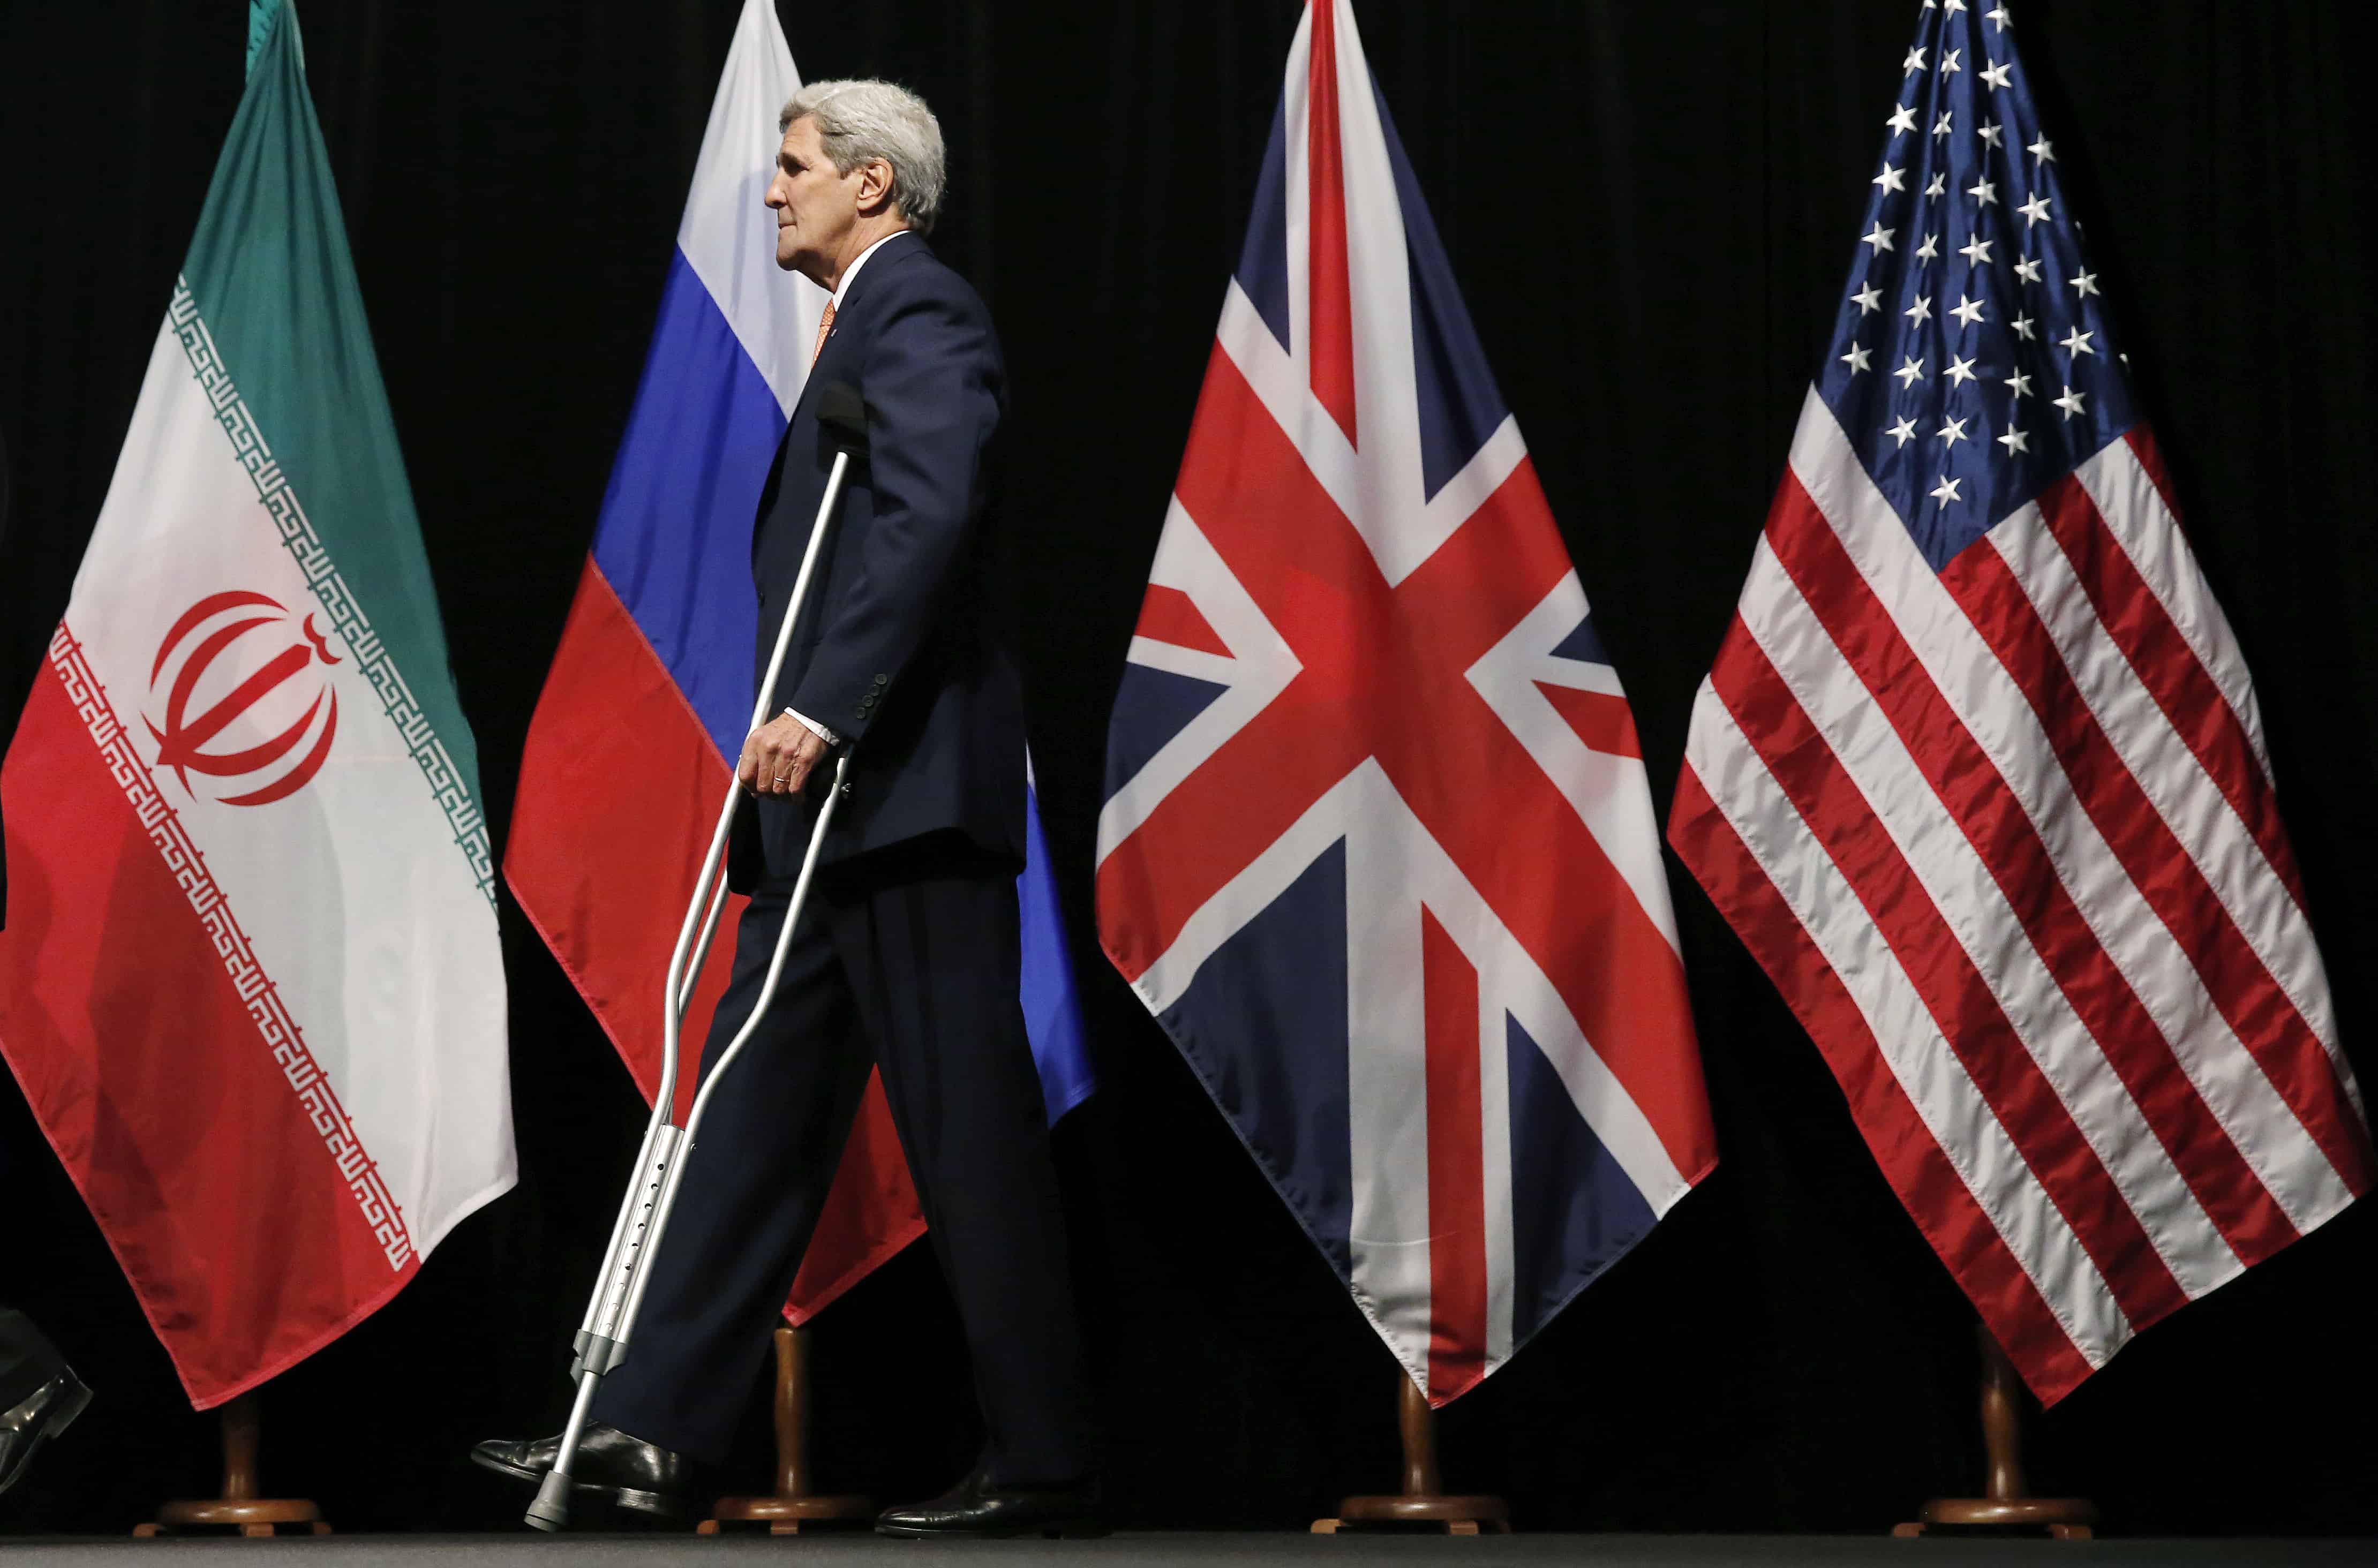 U.S. Secretary of State John Kerry leaves the stage after a group picture with foreign ministers and representatives from China, Iran, Britain, Germany, France, and the European Union at the Vienna International Center in Vienna, Austria July 14, 2015. Iran and six major world powers reached a nuclear deal on Tuesday, capping more than a decade of on-off negotiations with an agreement that could potentially transform the Middle East, and which Israel called an 